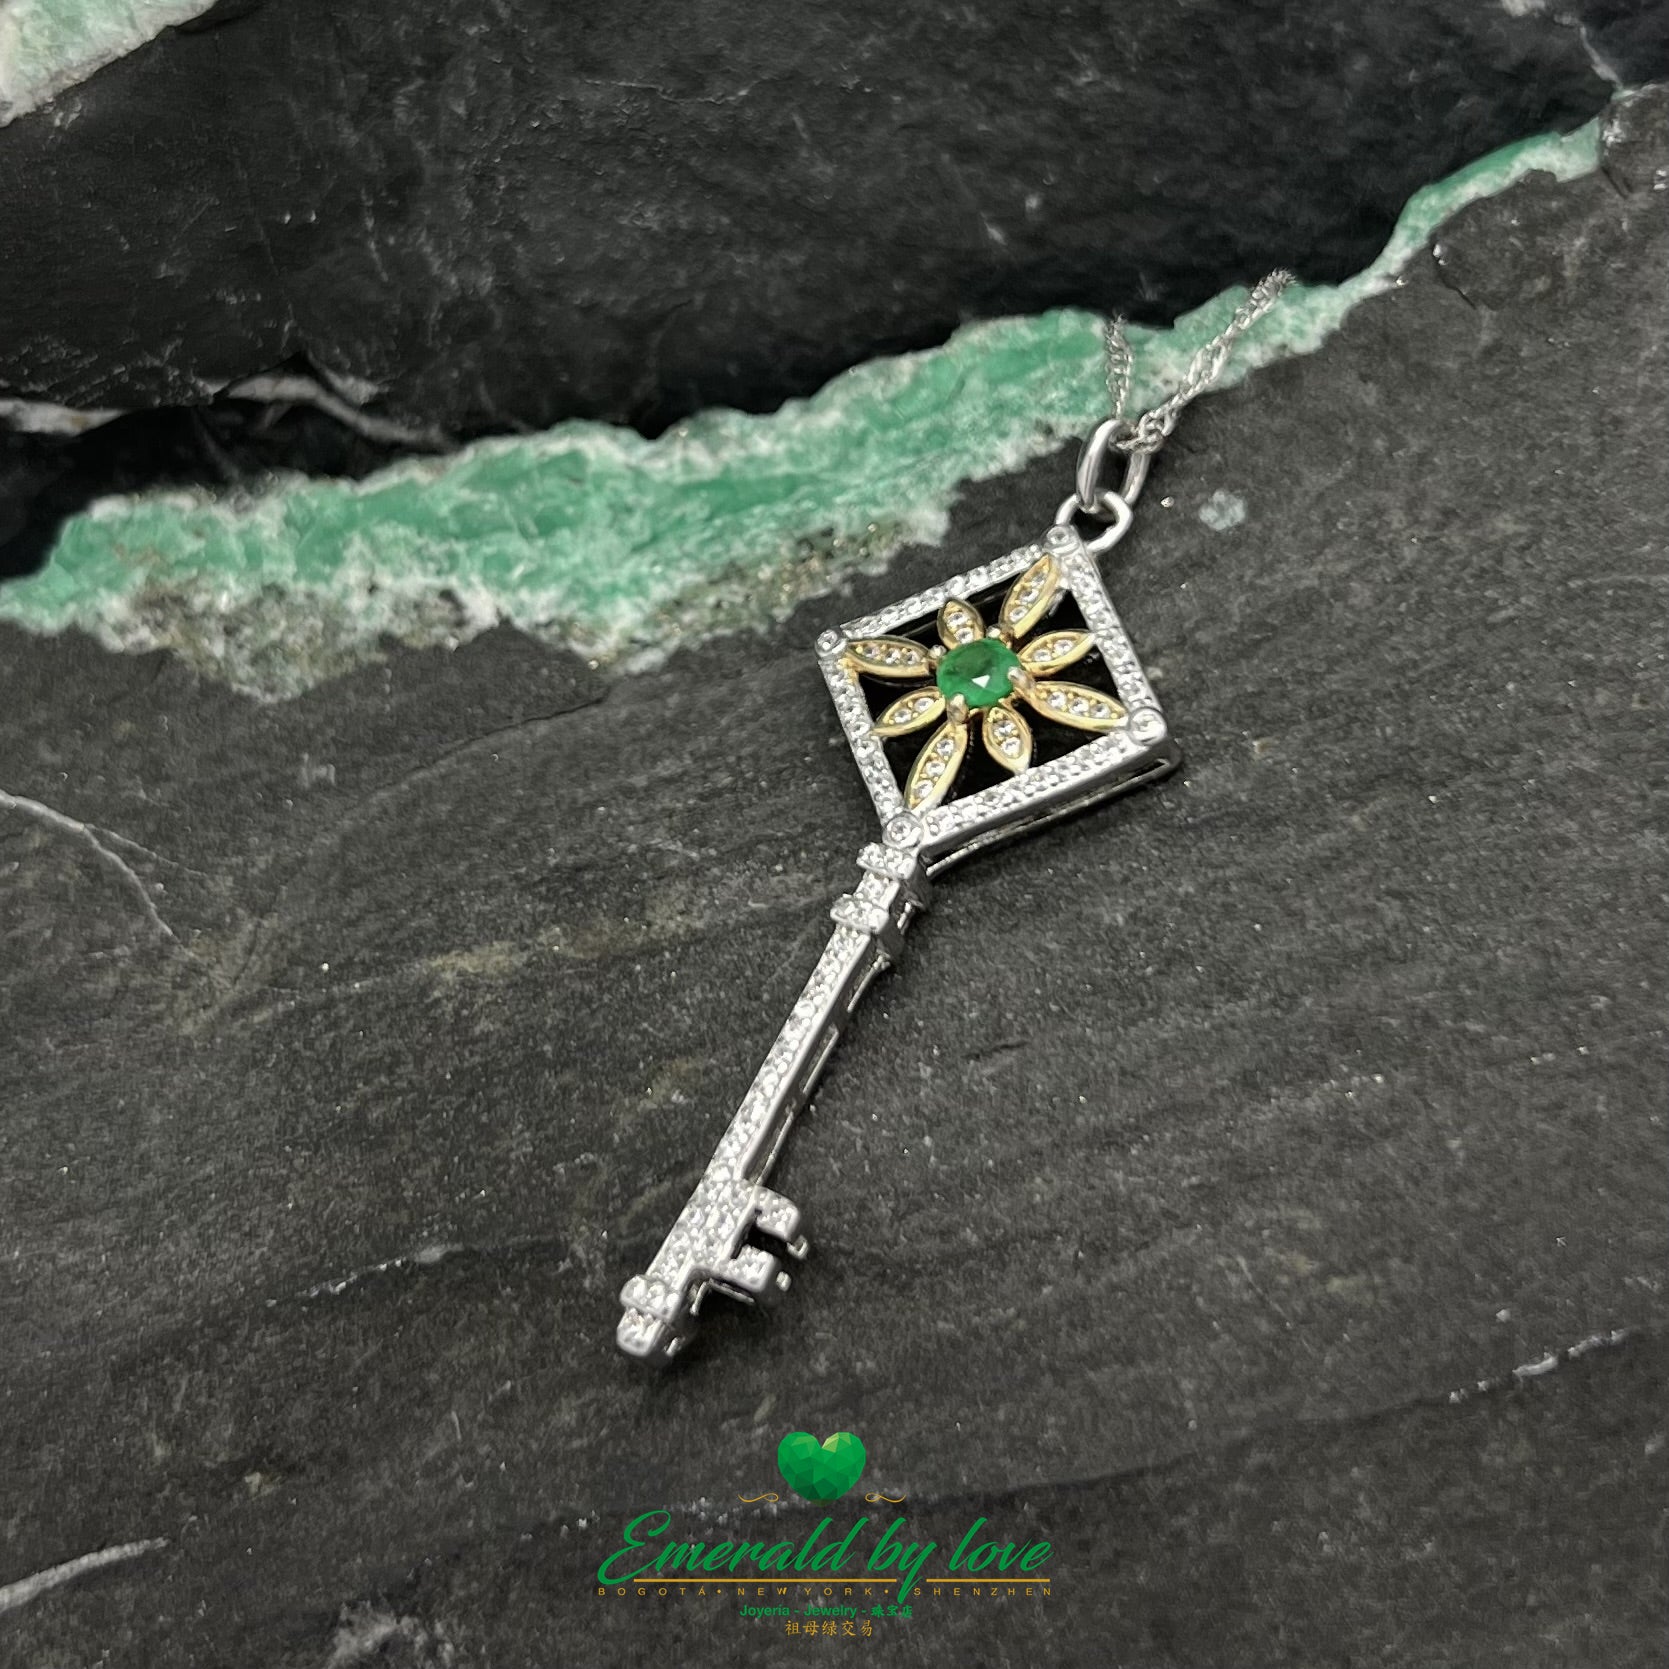 Gold-Plated Key Pendant with Flower Accent and Round Central Emerald